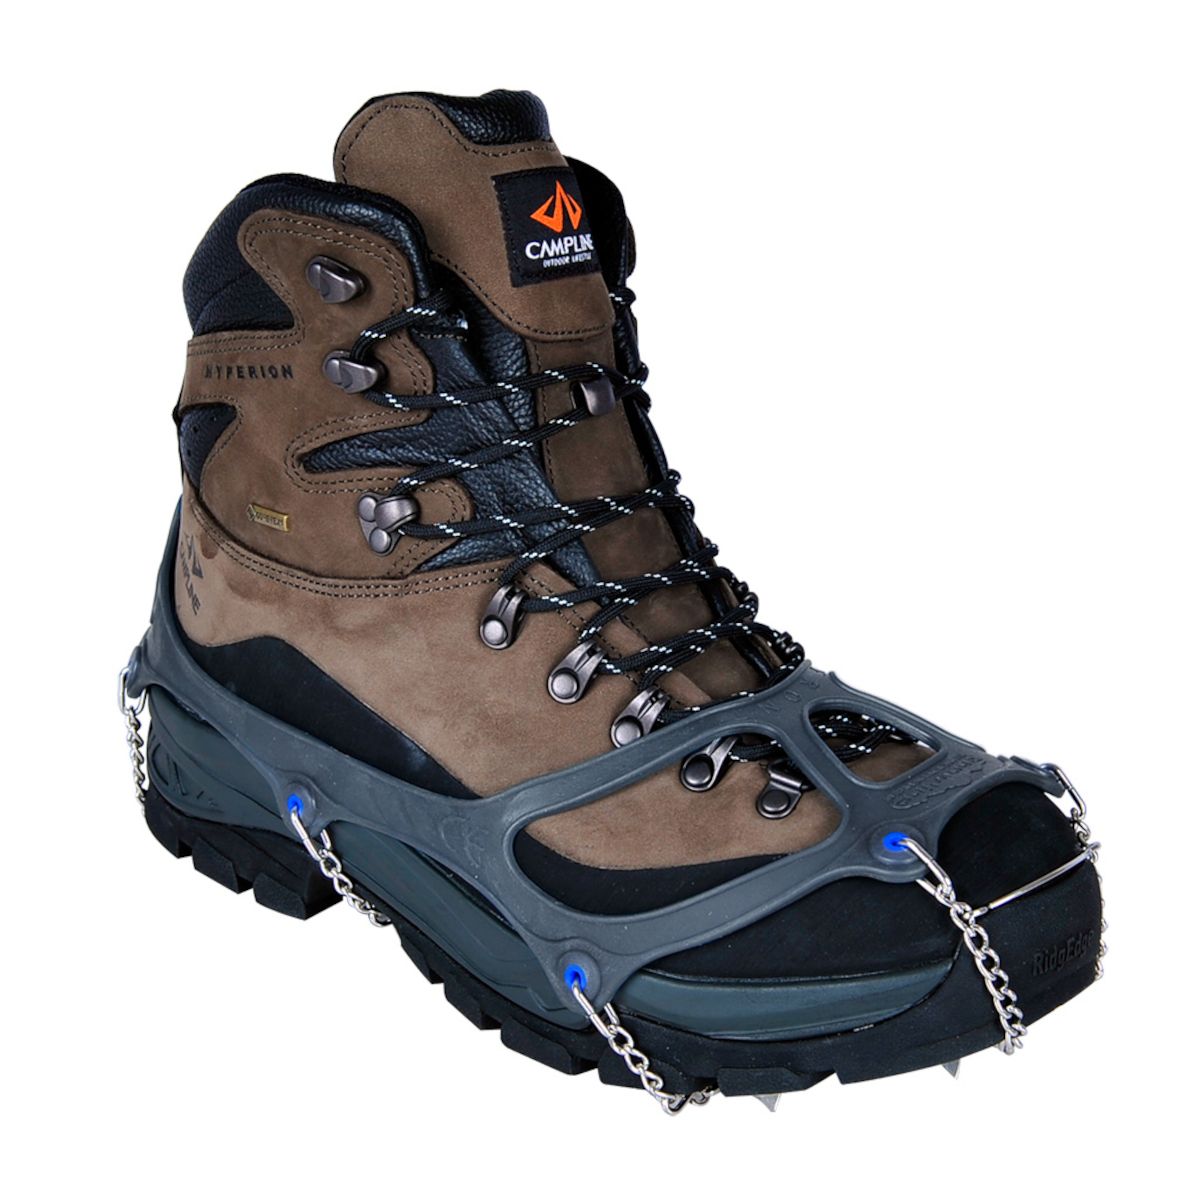 Snowline Chainsen Trail Light, Traction Devices